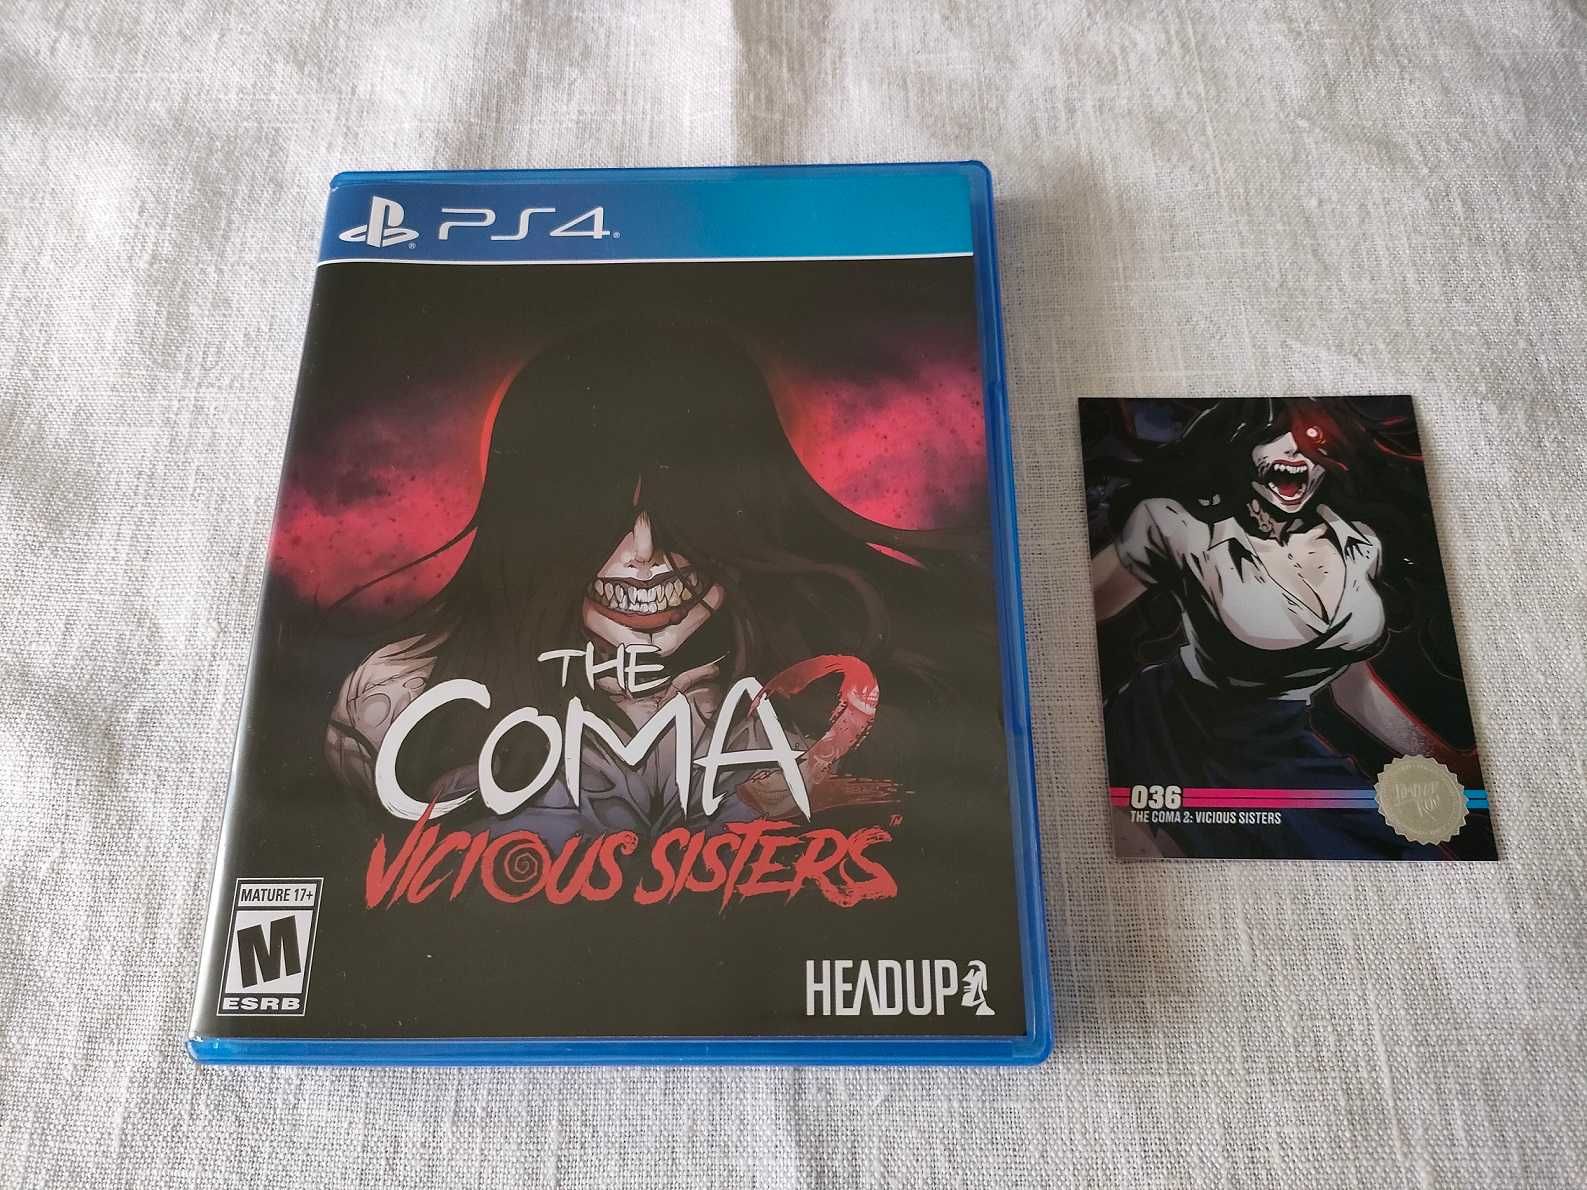 PS4 The Coma 2: Vicious Sisters